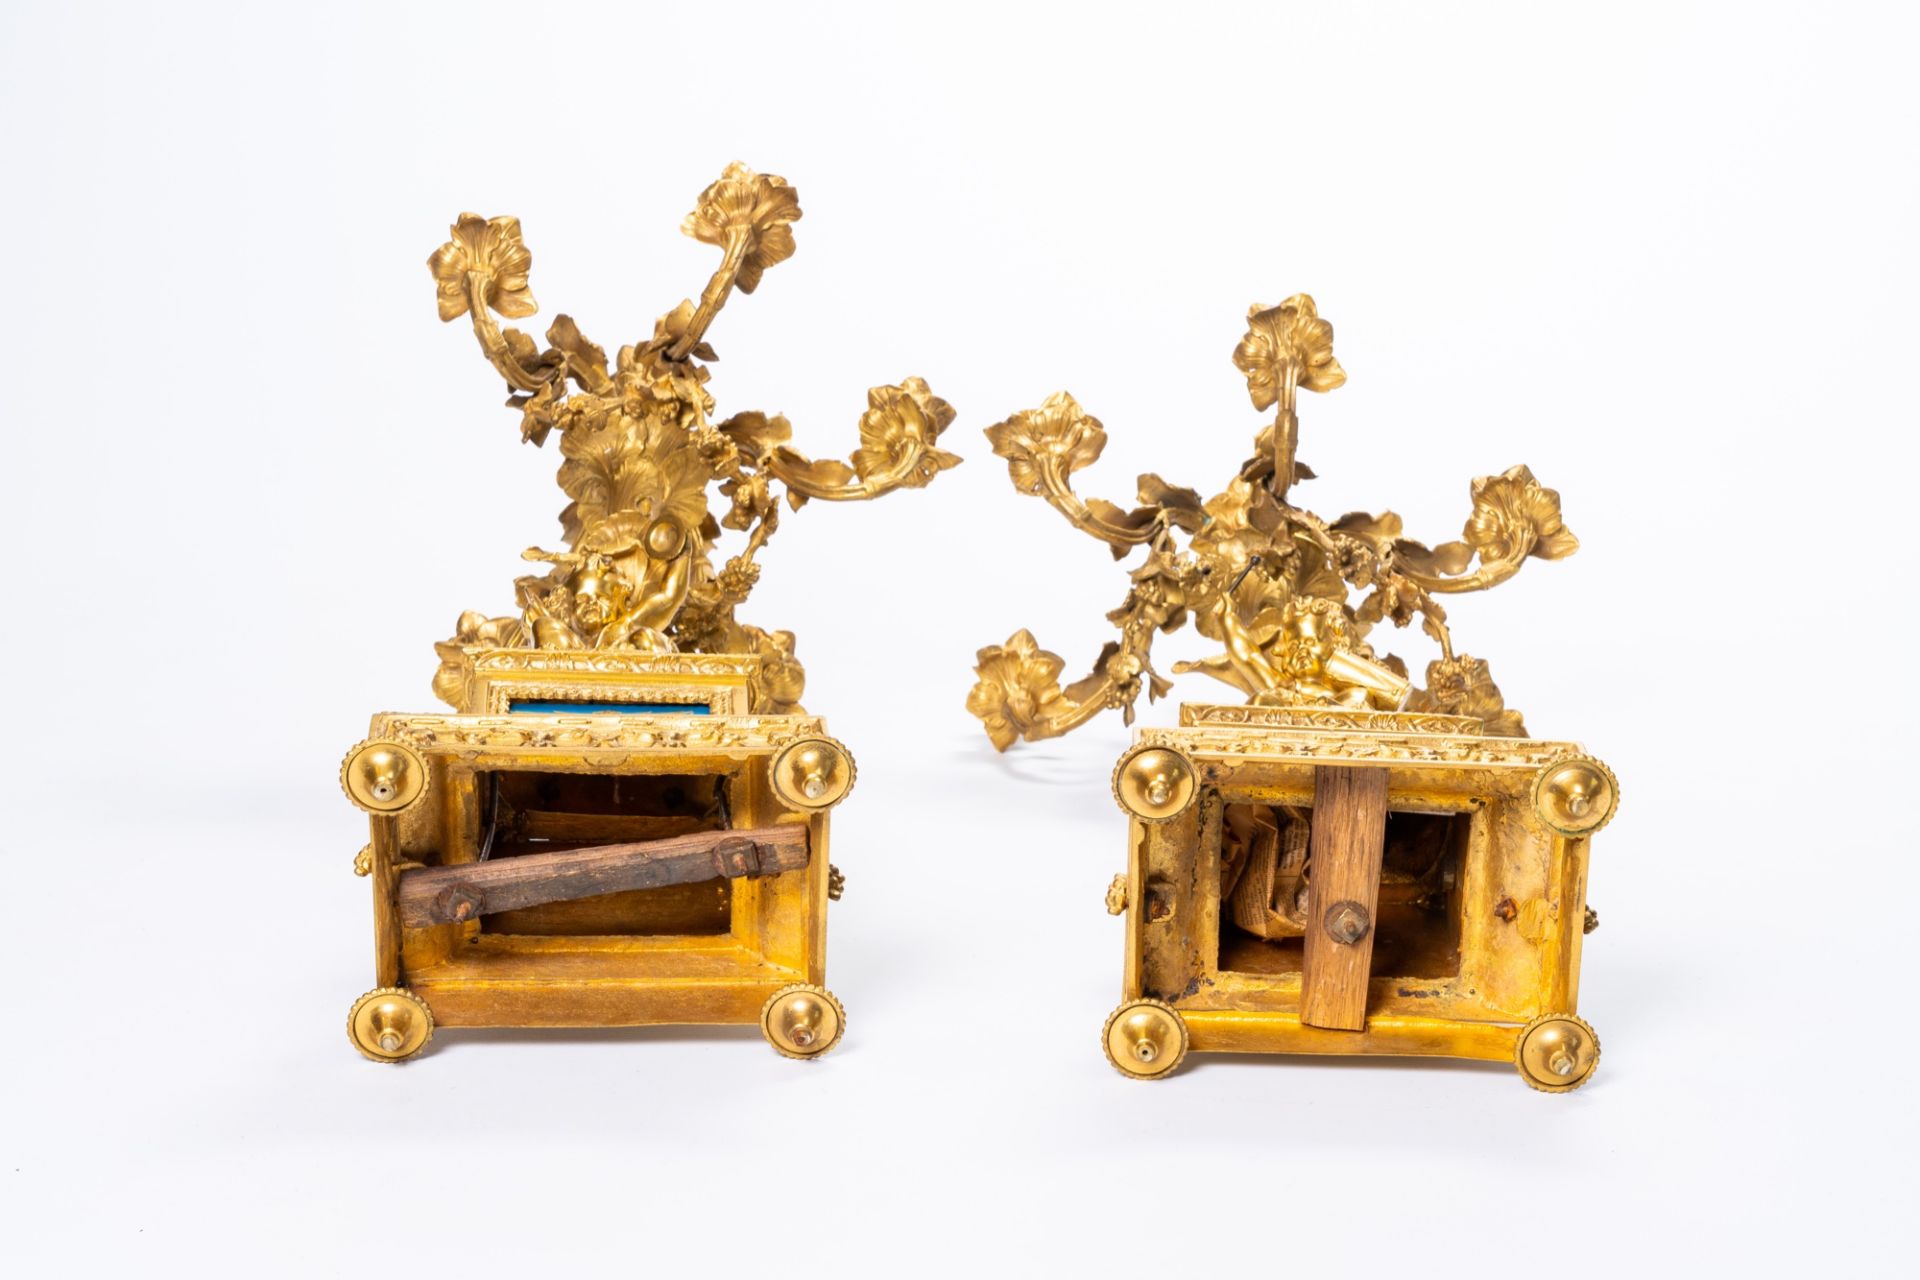 A French gilt bronze three-piece clock garniture with musicians and Svres style plaques, 19th C. - Image 20 of 21